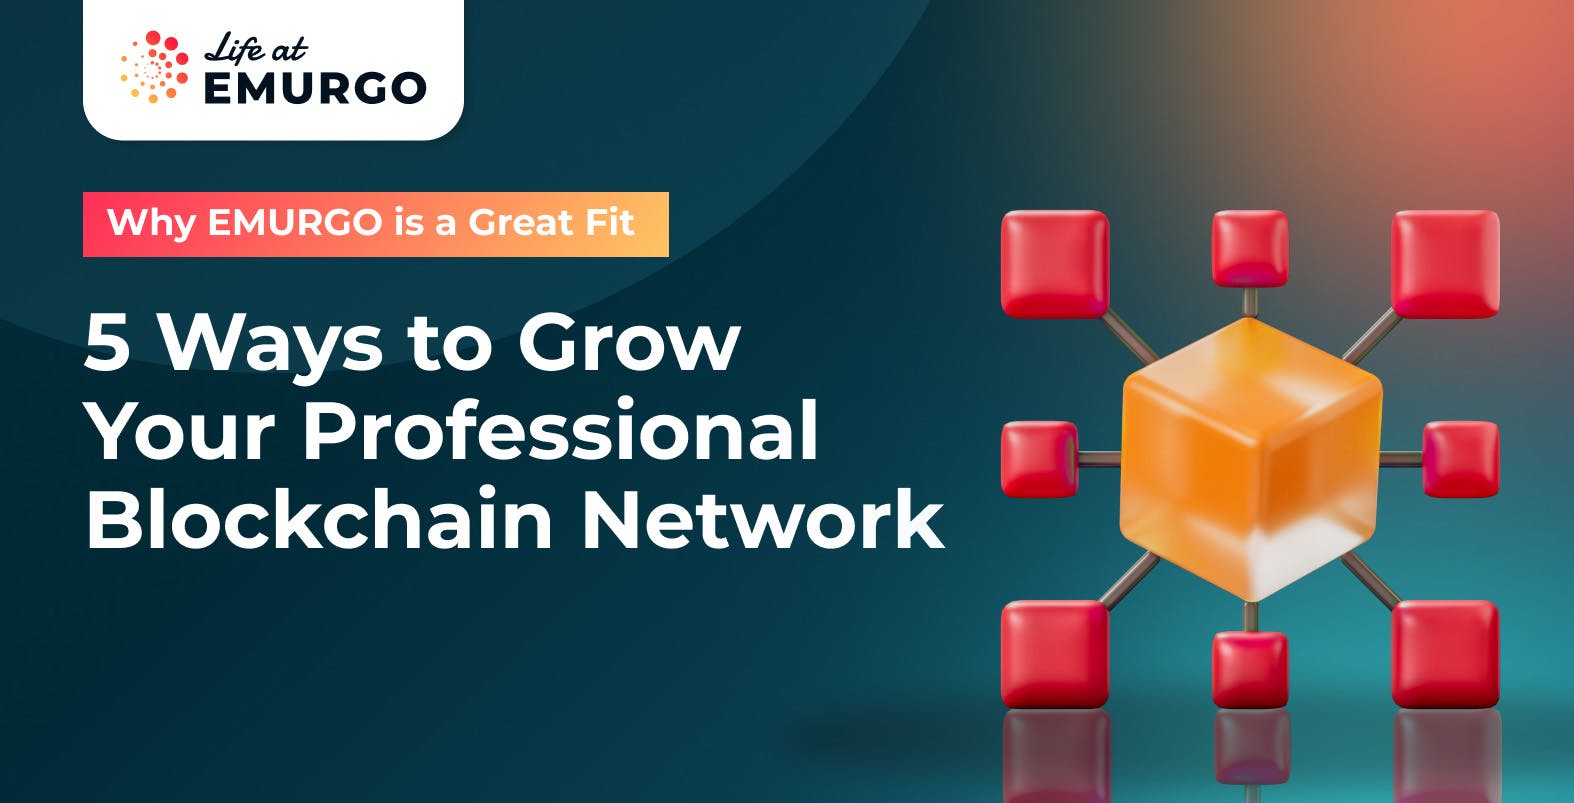 Blog-Series-Why-EMURGO-is-a-Great-Fit_-5-Ways-to-Grow-Your-Professional-Blockchain-Network-2.jpg